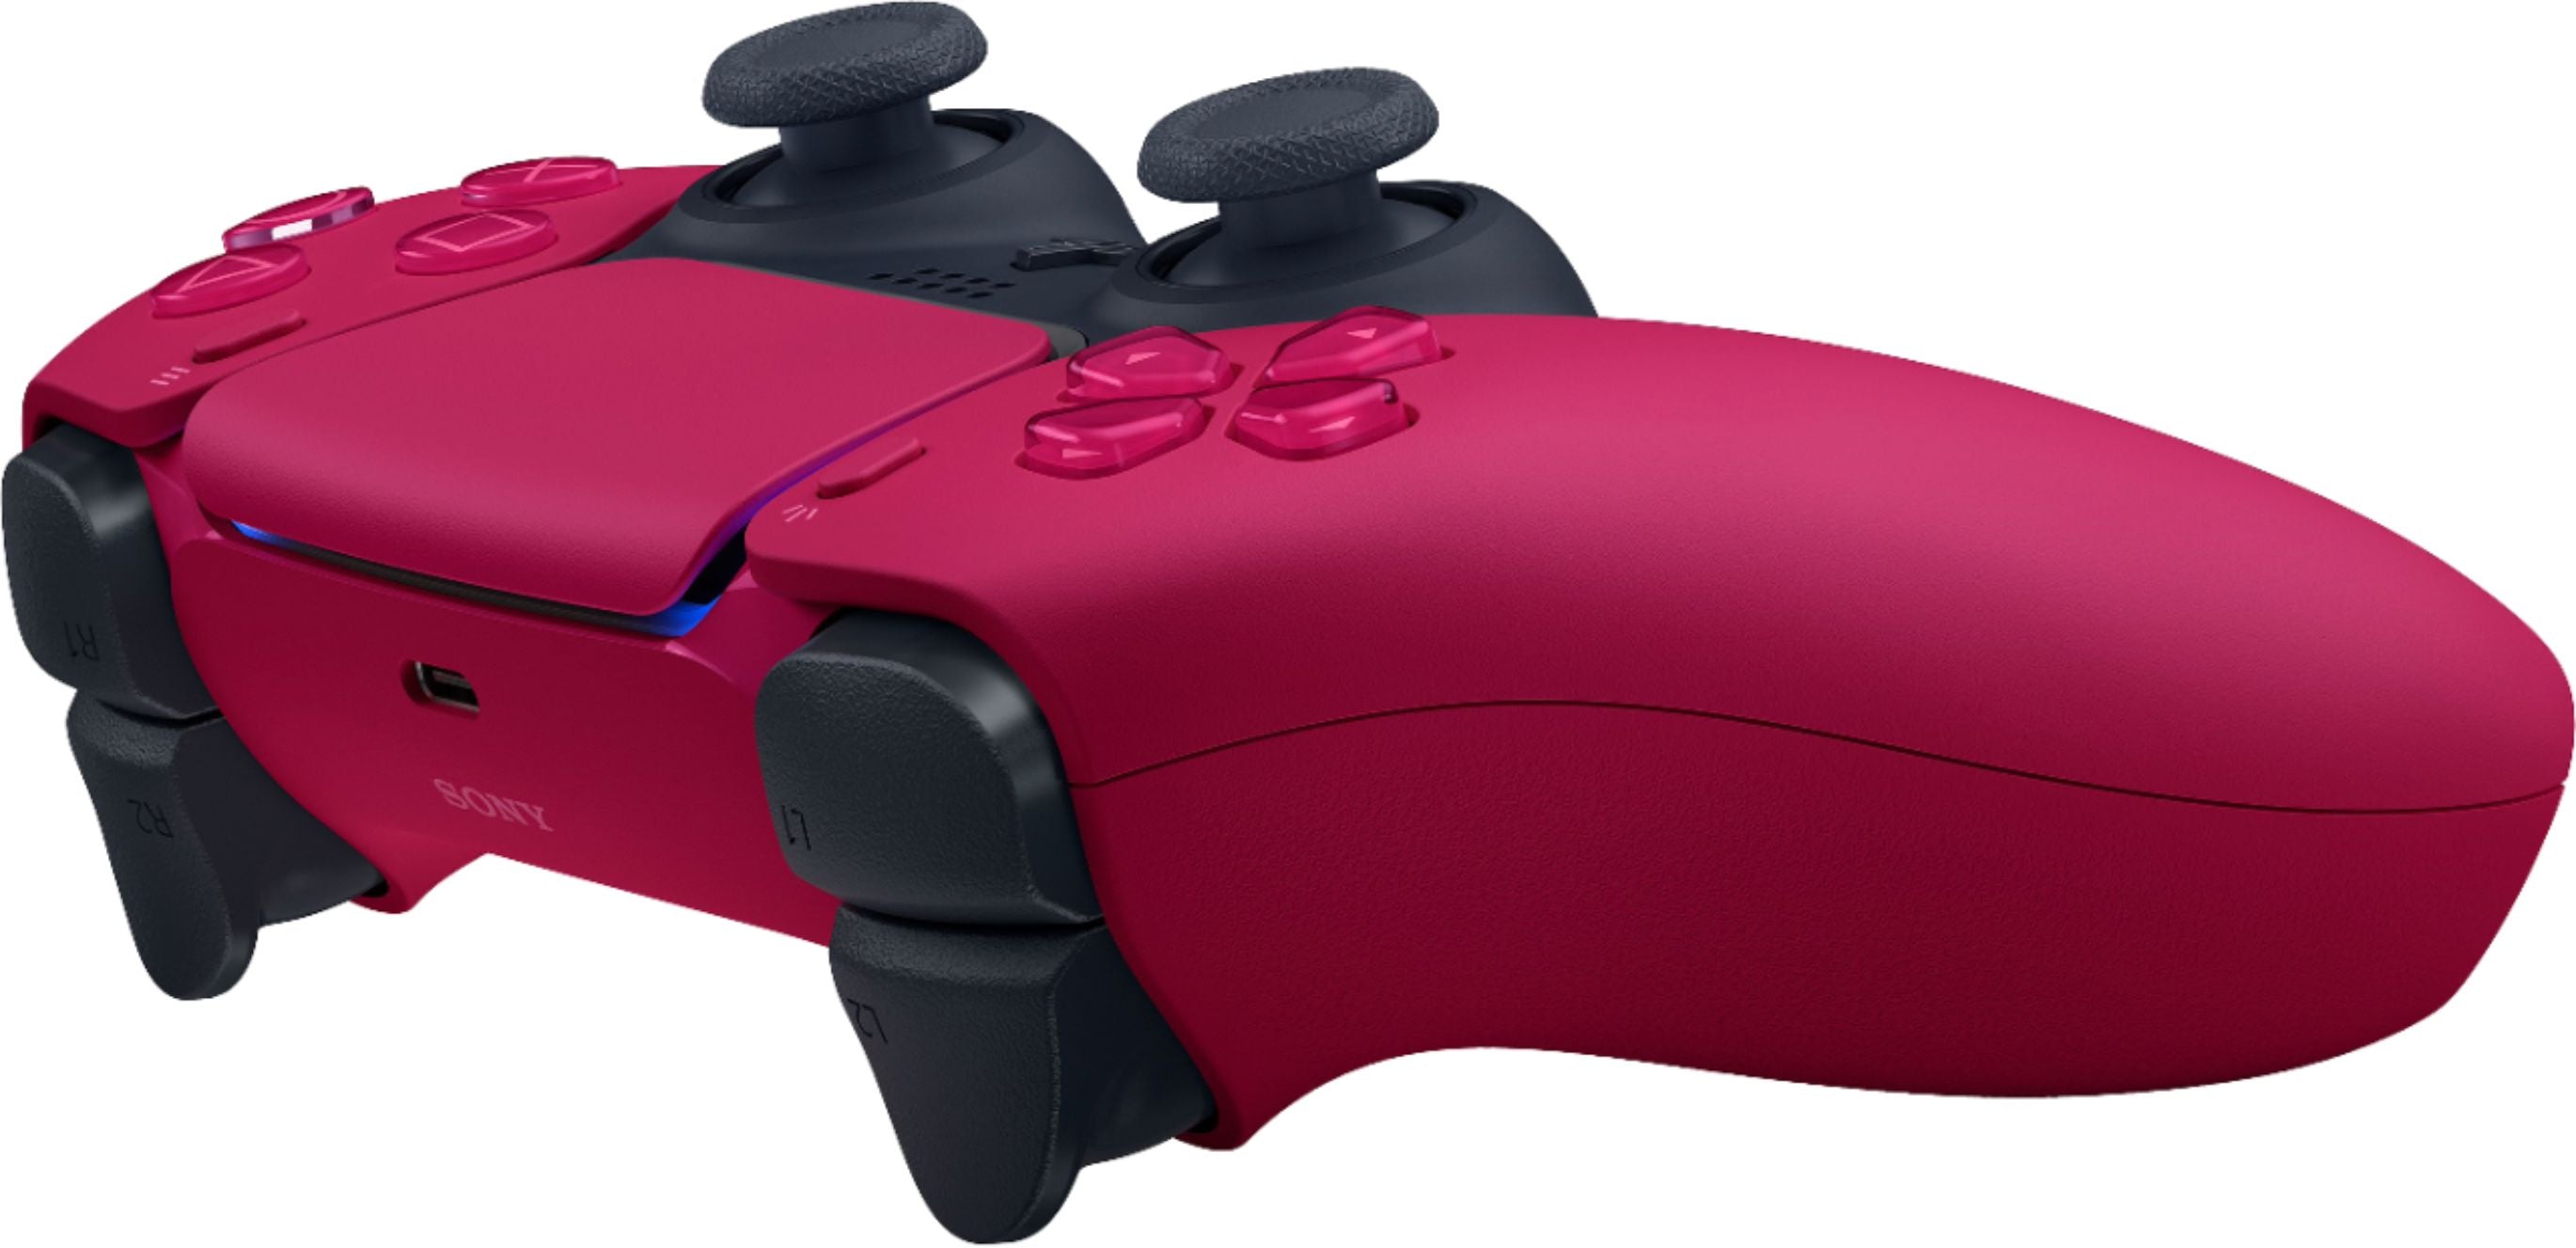 PlayStation 5 DualSense Wireless Controller - Cosmic Red - PS5